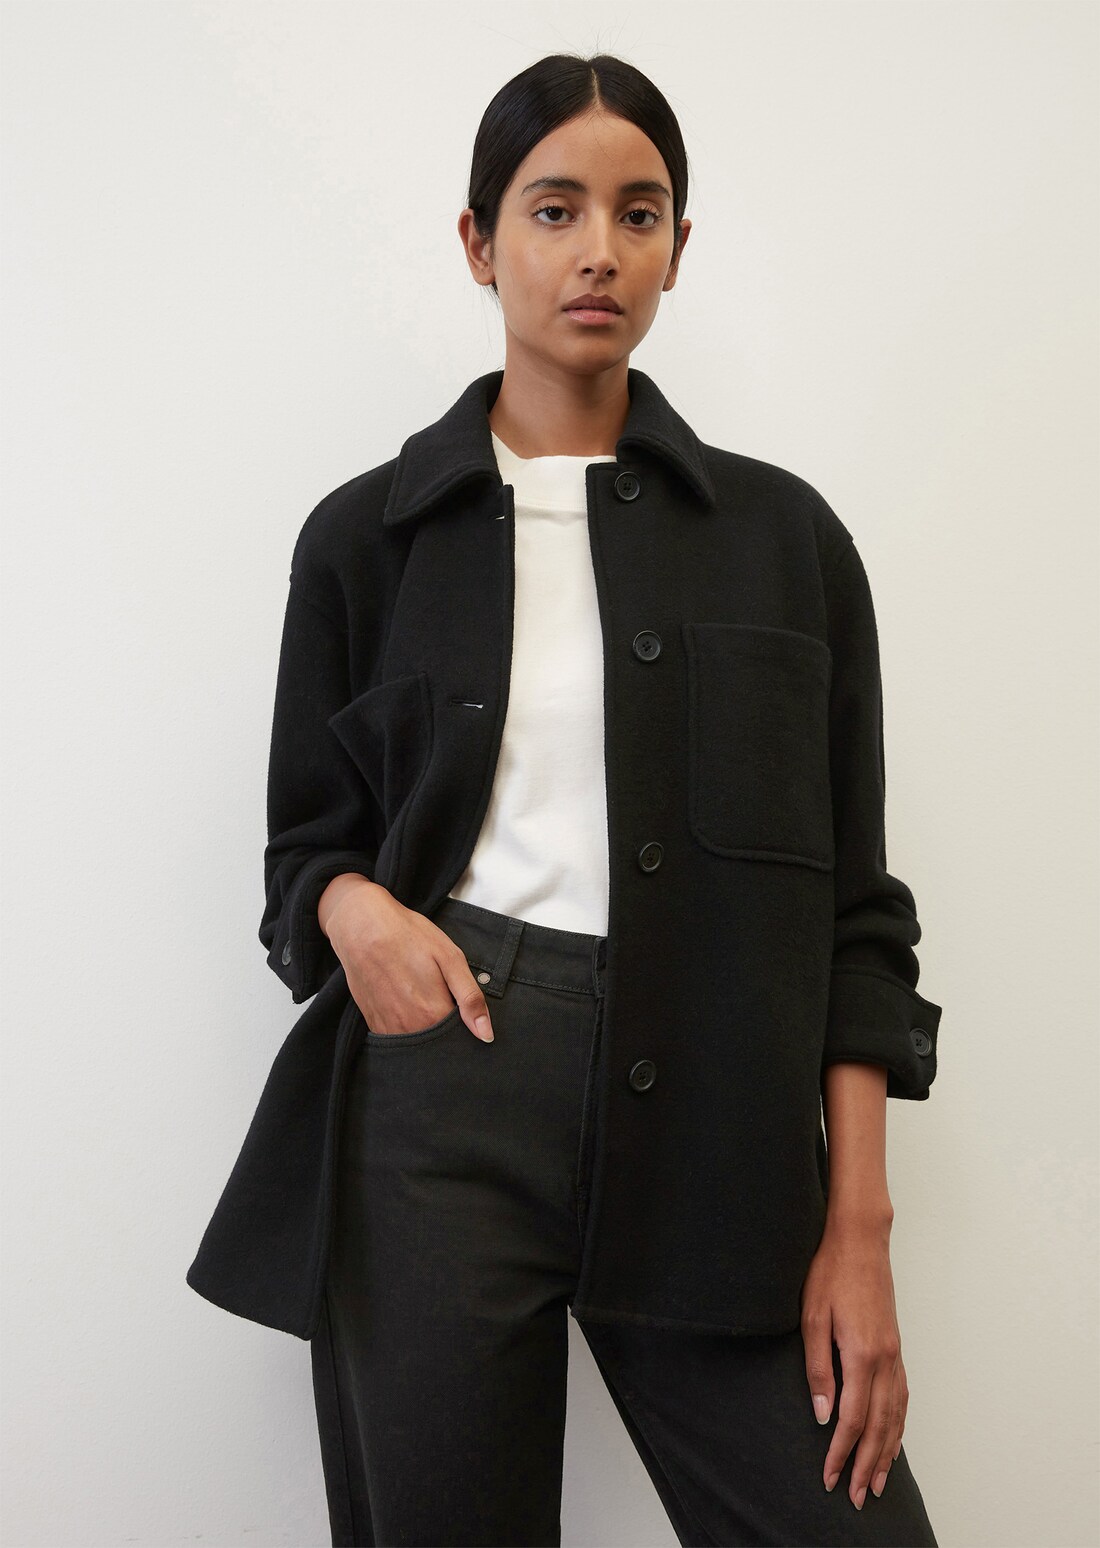 Shacket, relaxed fit made of wool blend jersey - black | Light jackets ...